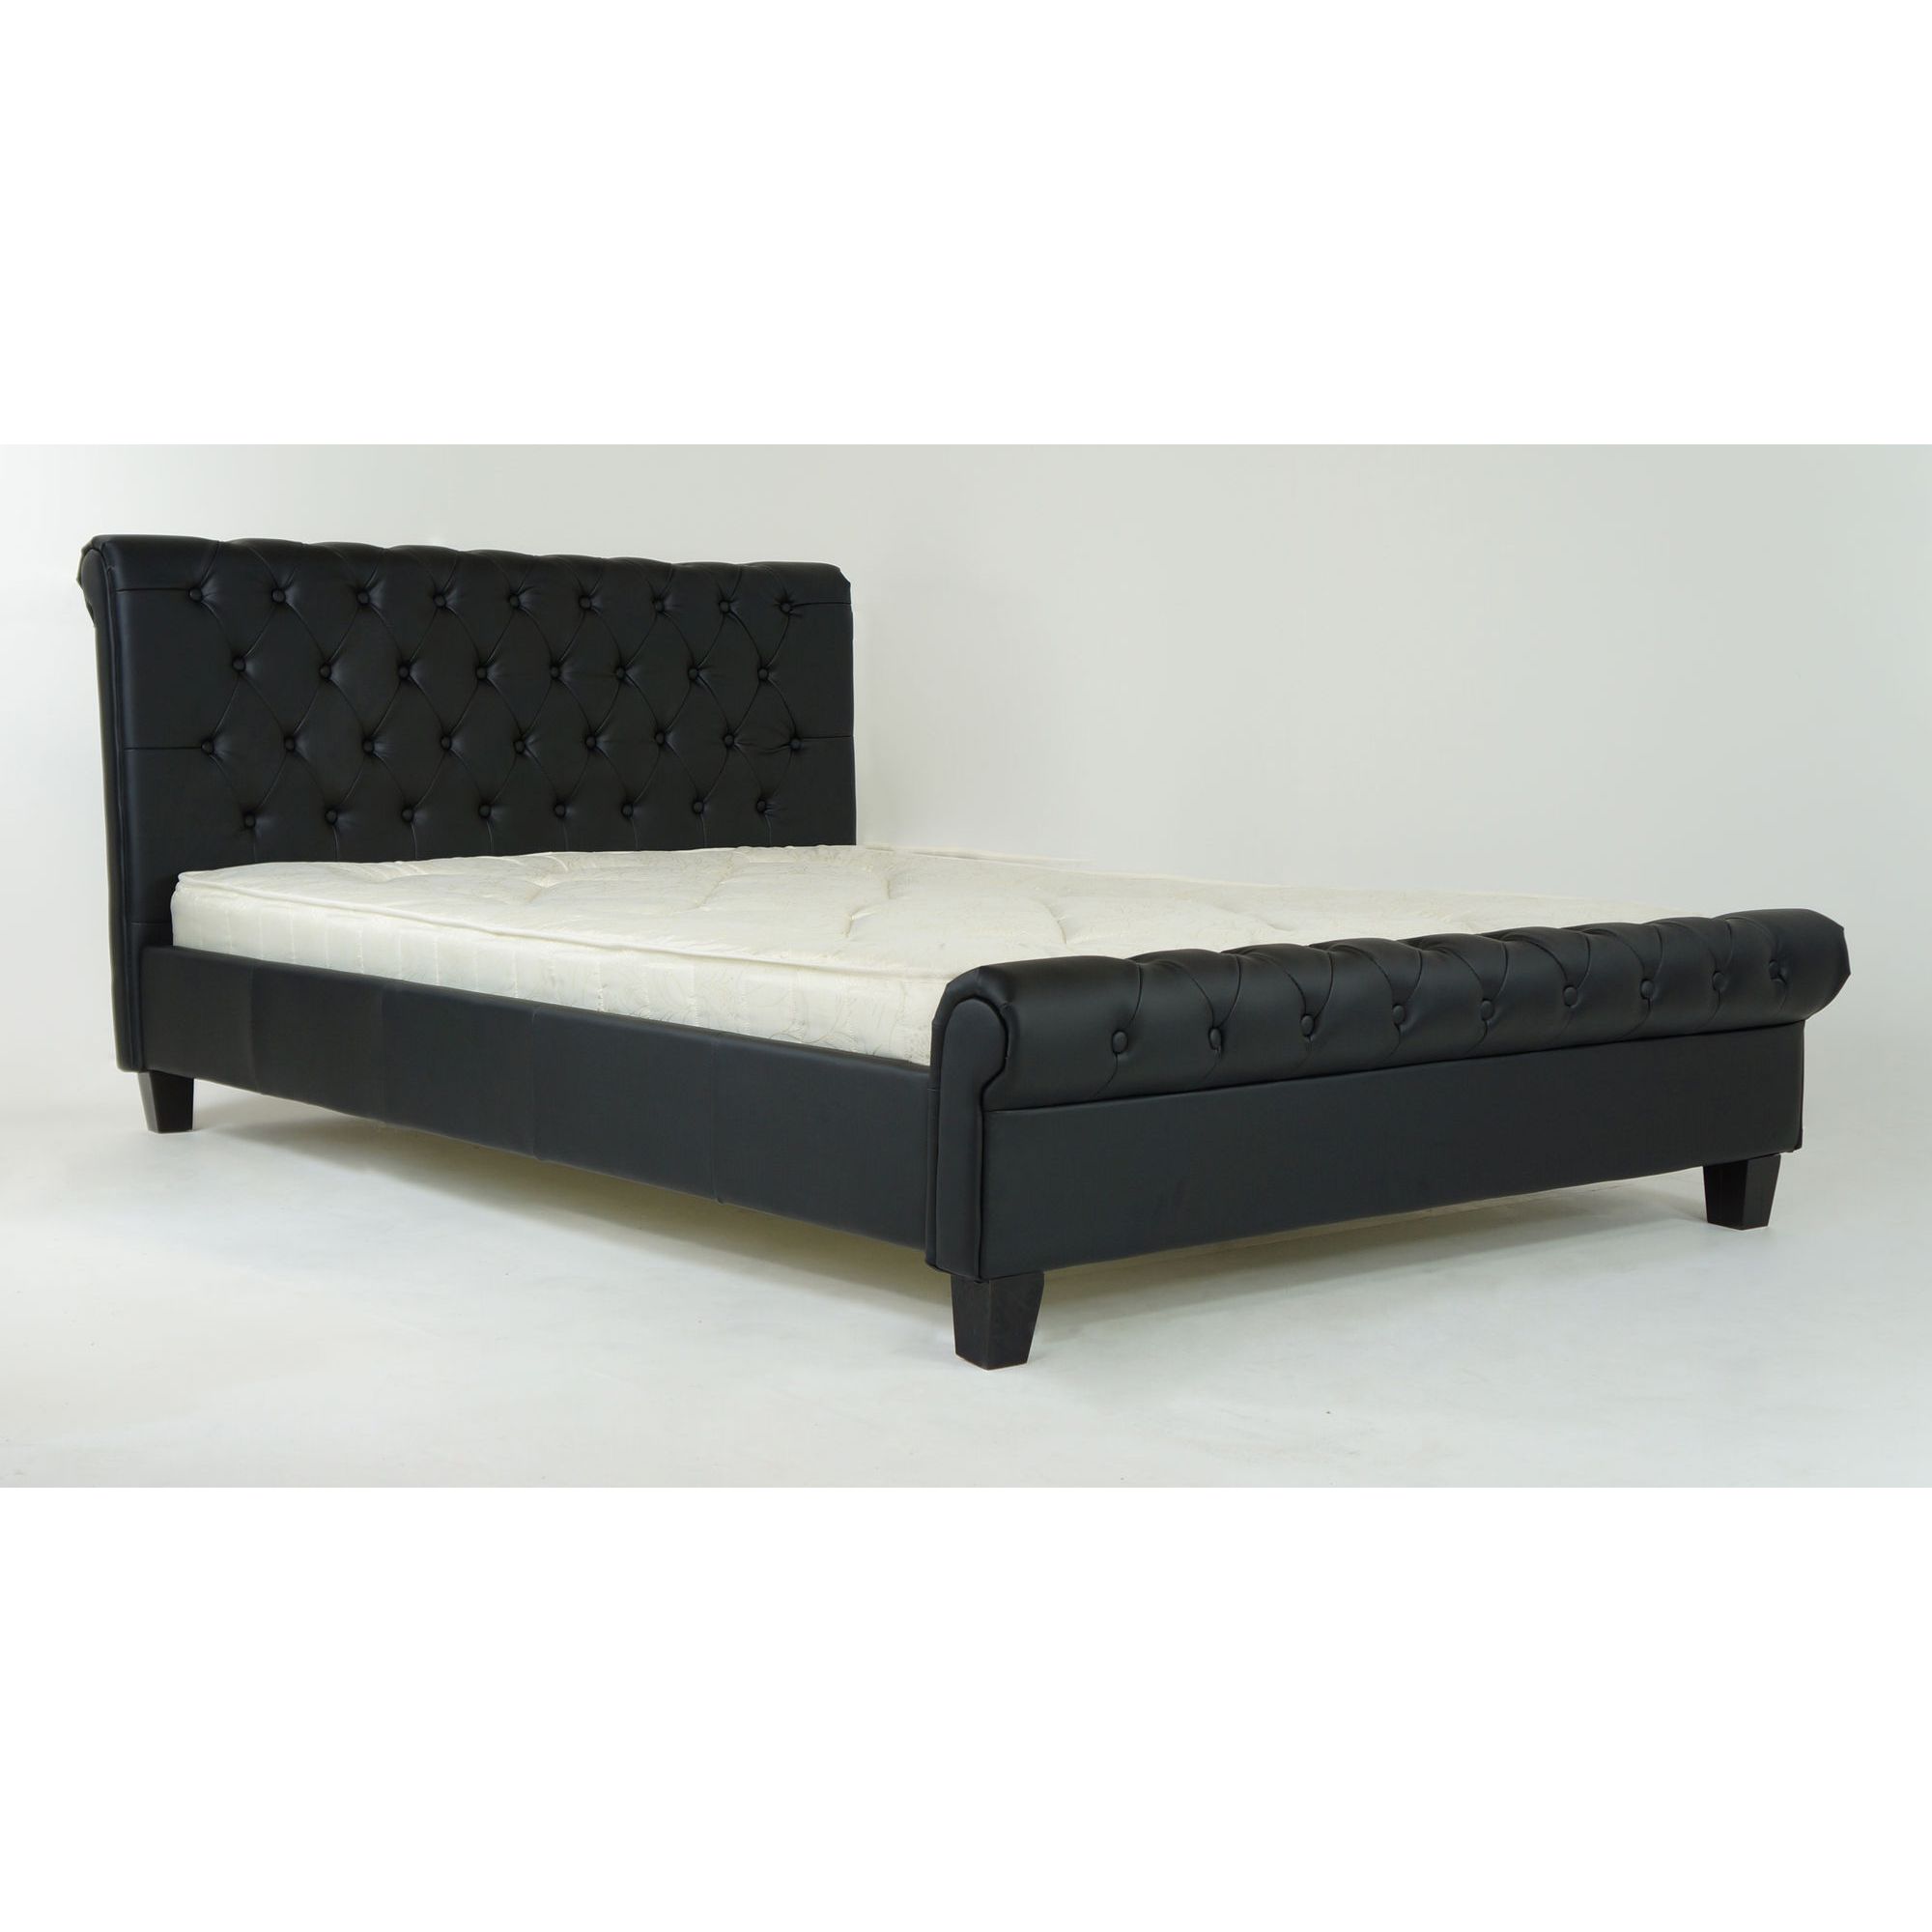 Alpha furniture Chesterfield Real Leather Bed, King, Black at Tescos Direct